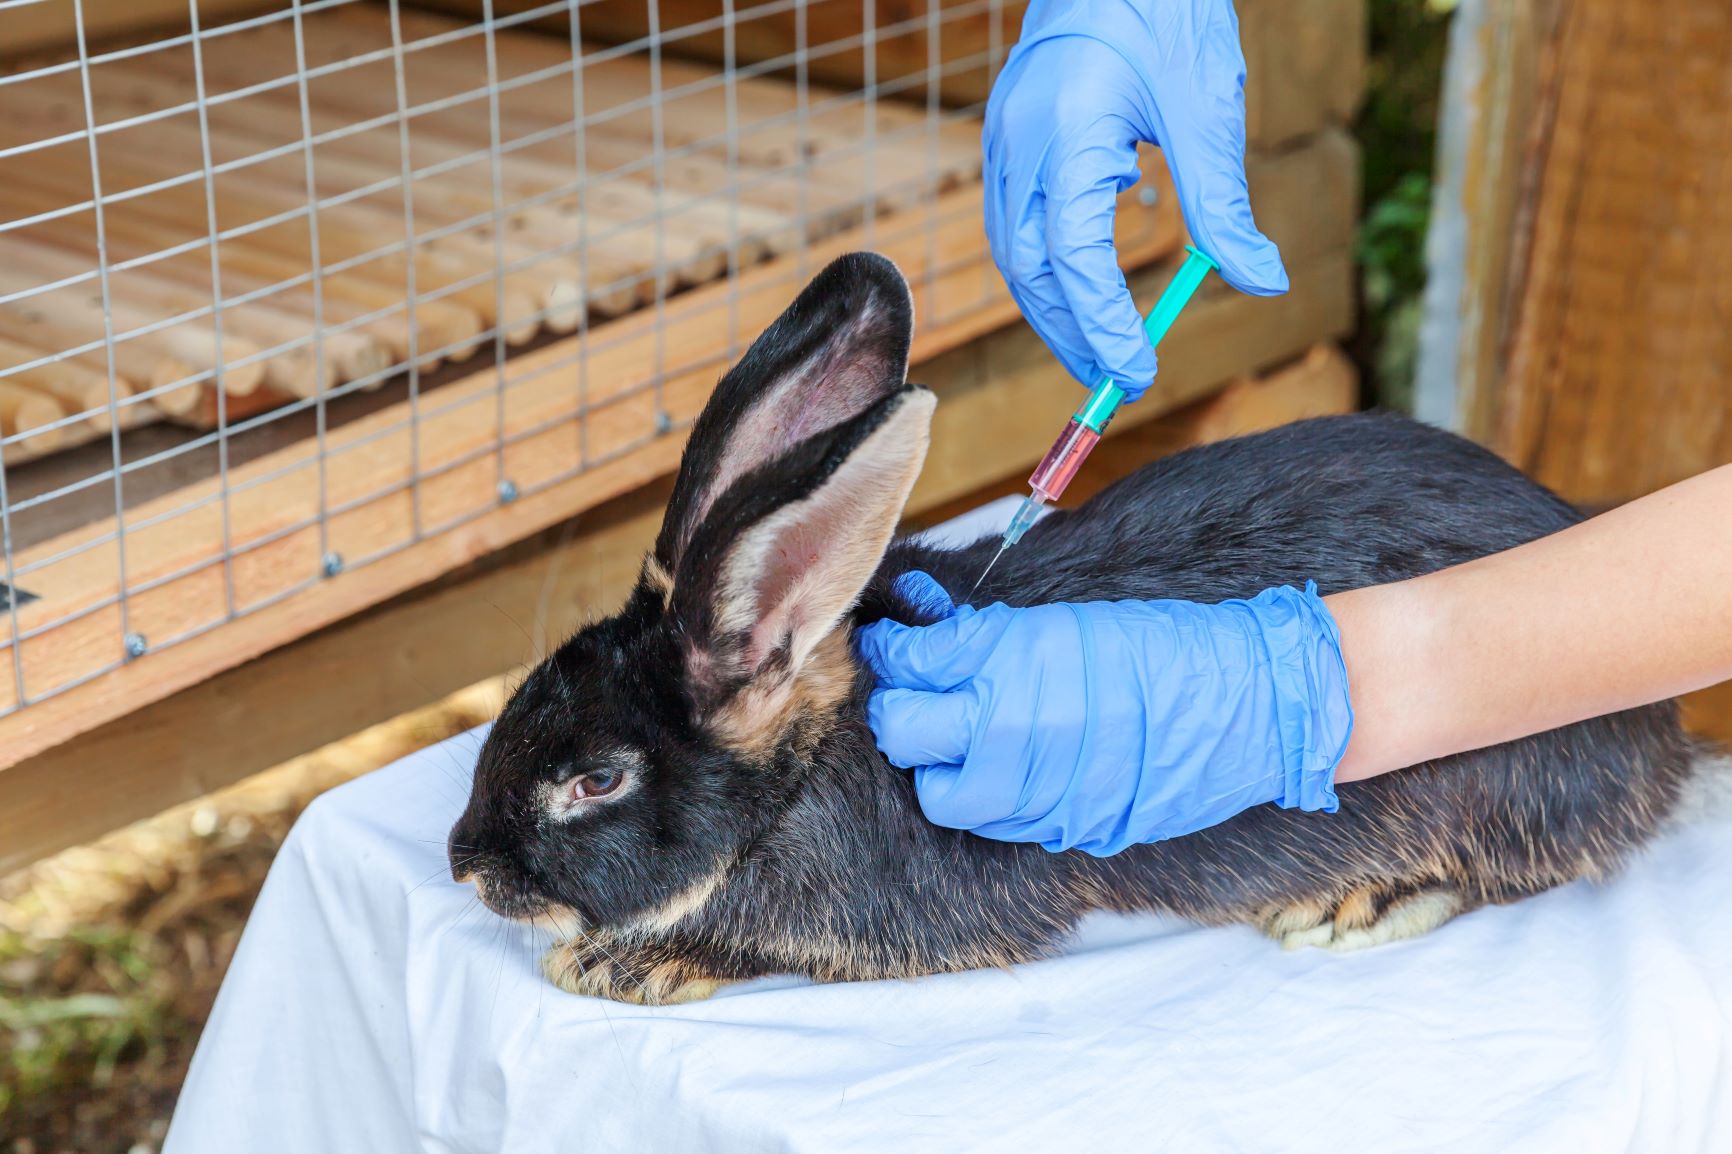 Rabbit getting vaccinated